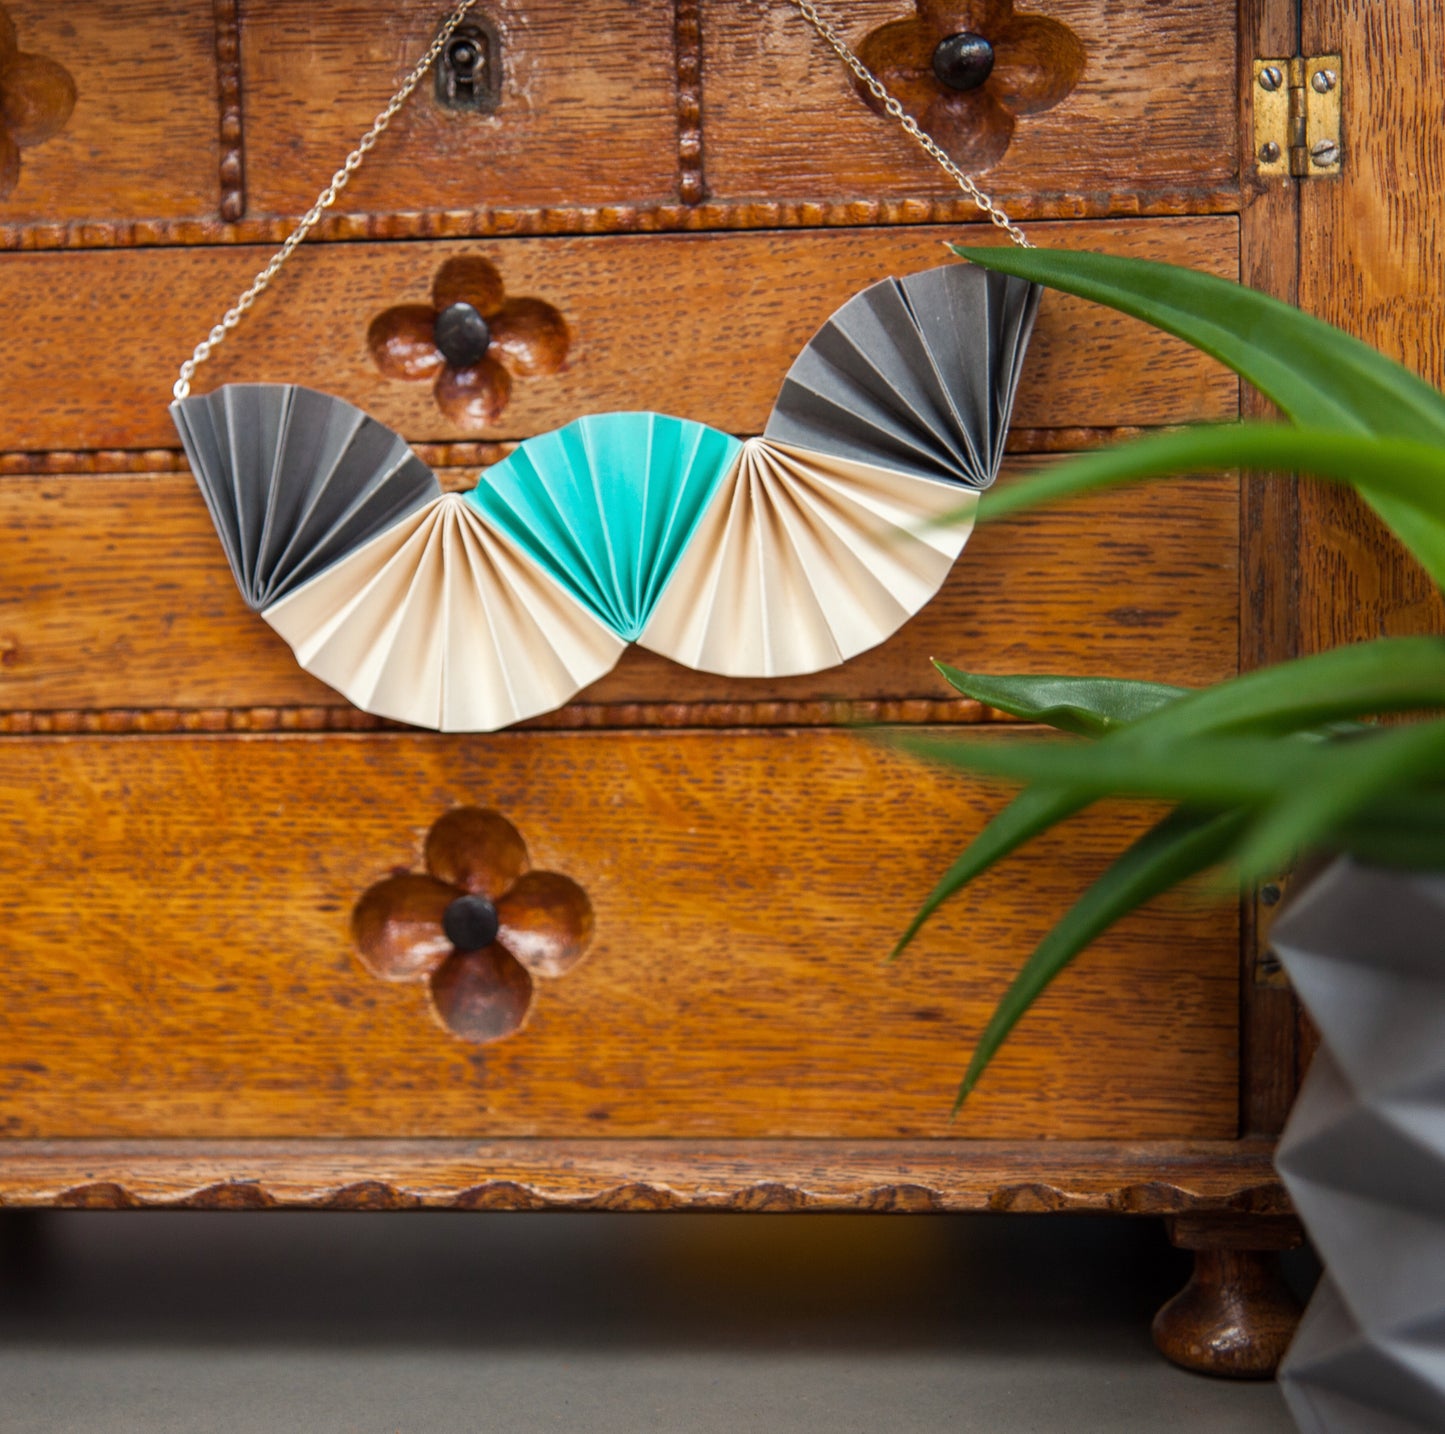 Online Course: Origami Clamshell Necklace